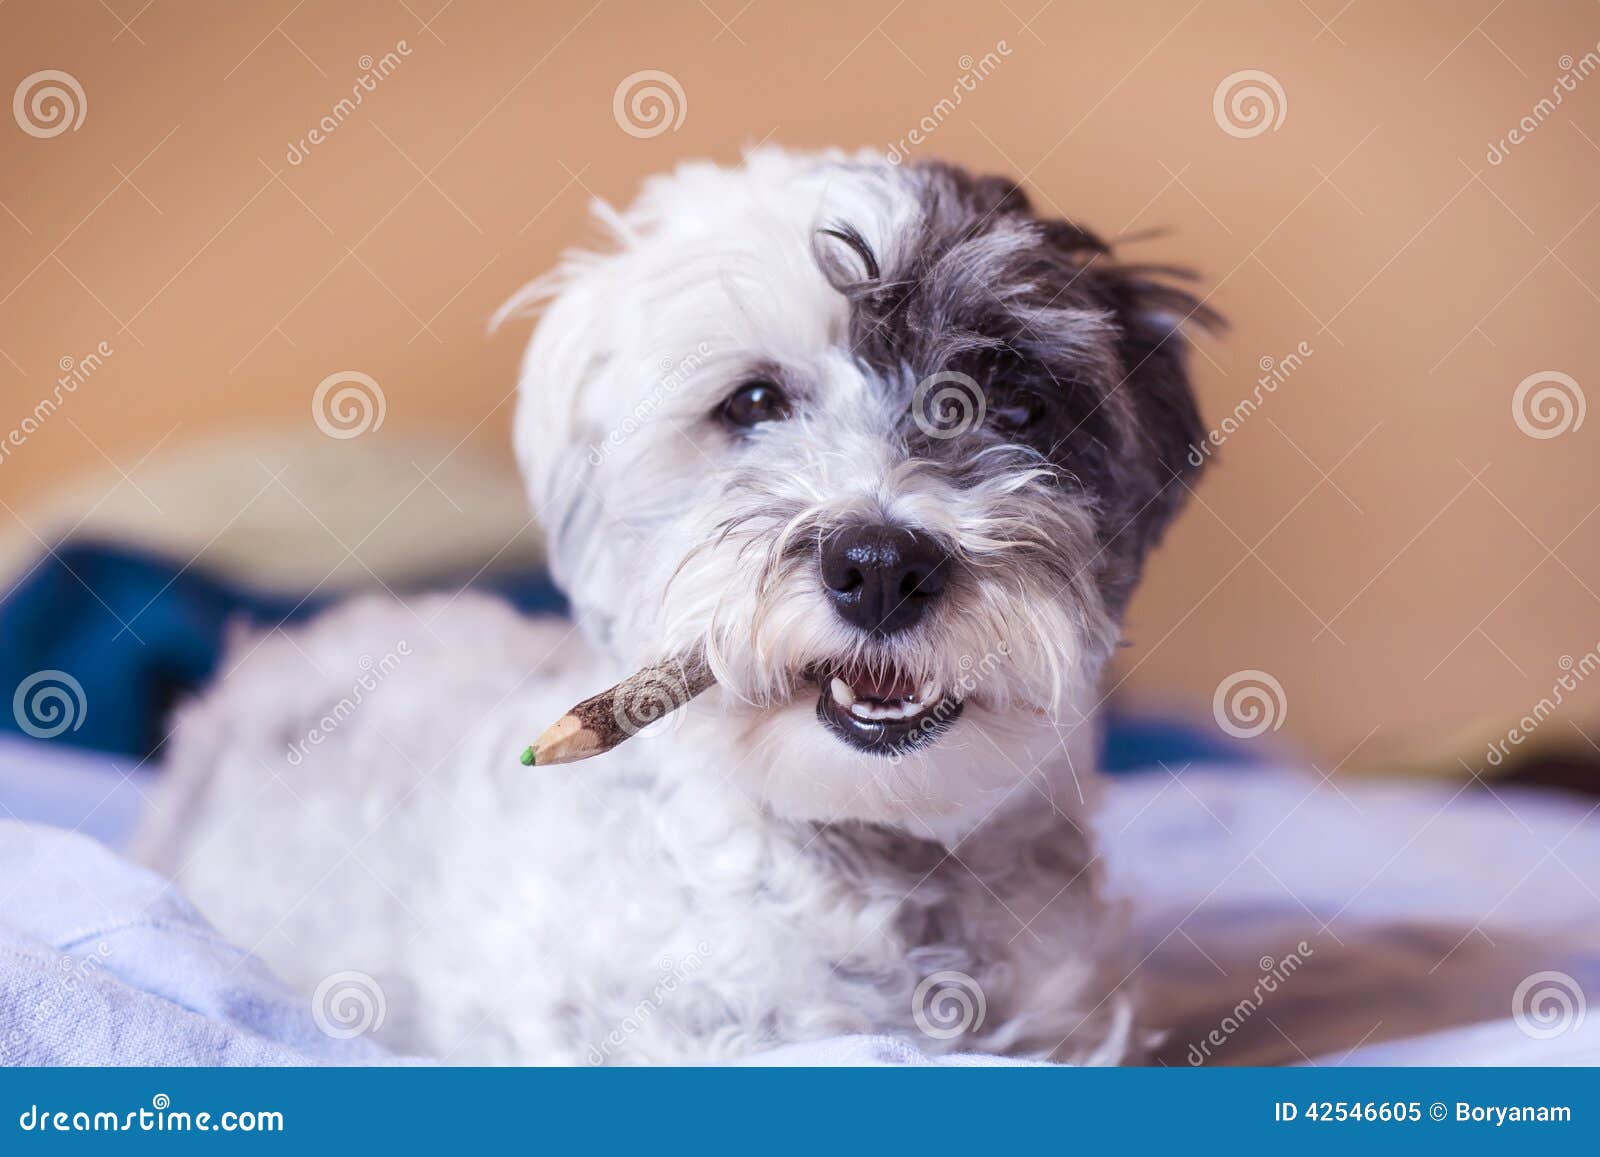 Dog with Pencil in the Mouth Stock Image - Image of white, posing: 42546605